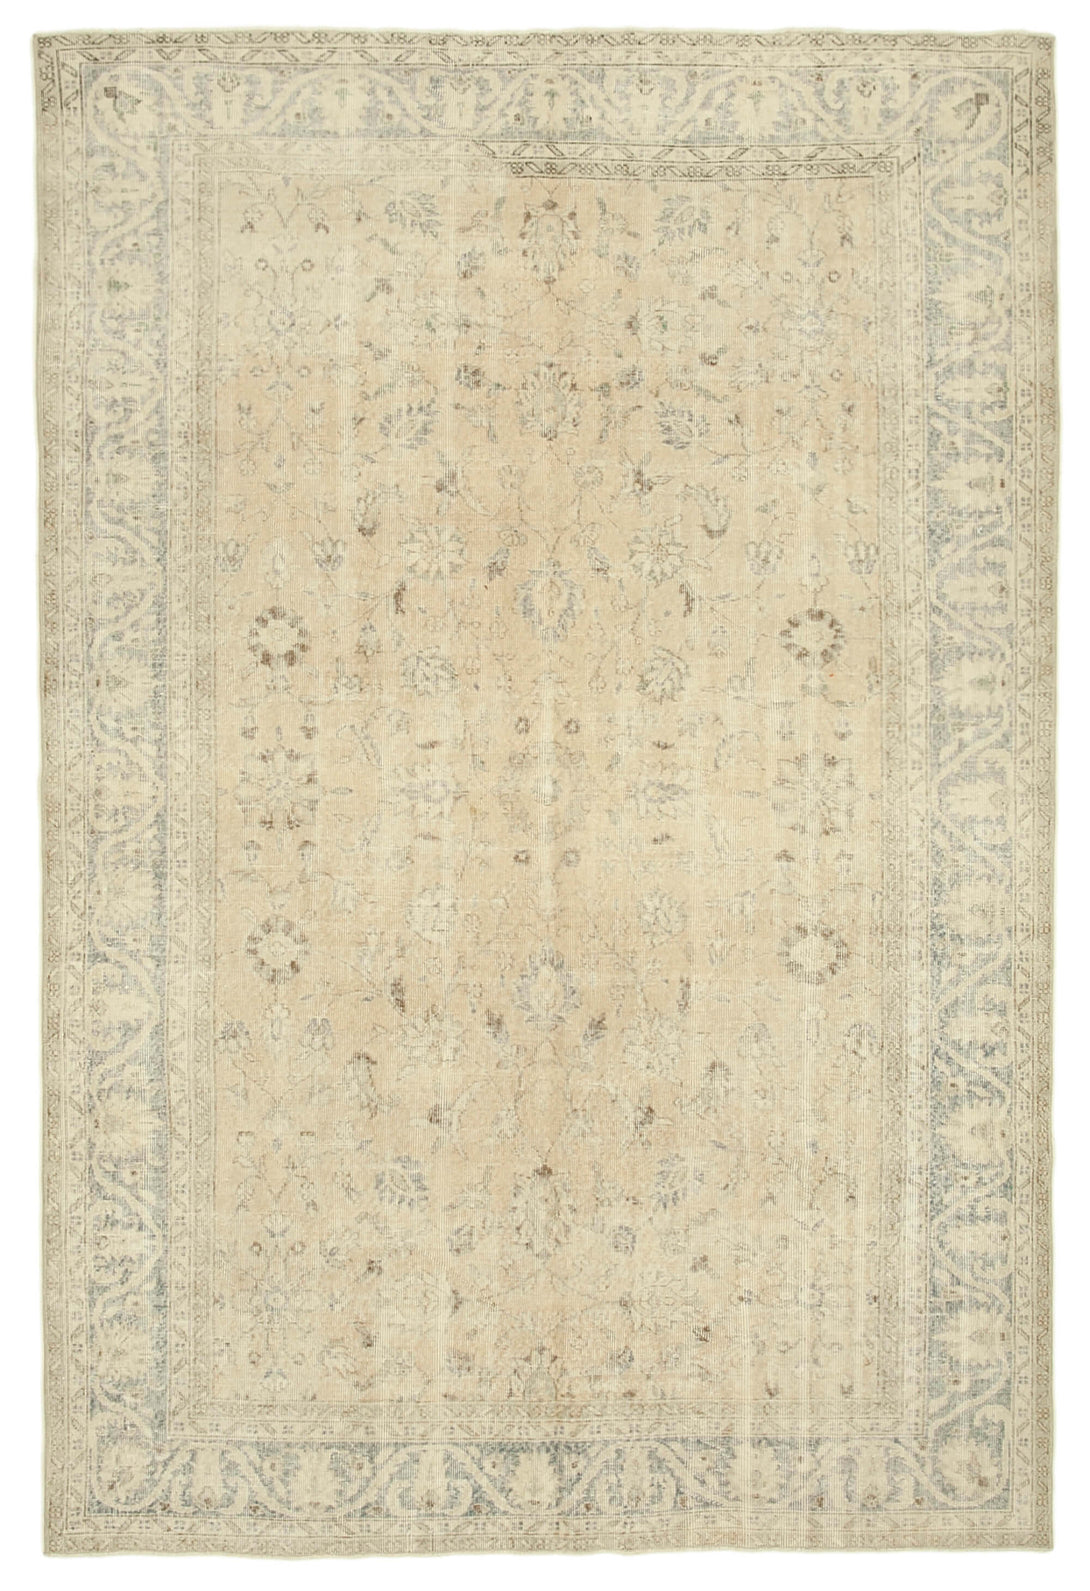 Handmade White Wash Area Rug > Design# OL-AC-38858 > Size: 6'-11" x 10'-3", Carpet Culture Rugs, Handmade Rugs, NYC Rugs, New Rugs, Shop Rugs, Rug Store, Outlet Rugs, SoHo Rugs, Rugs in USA